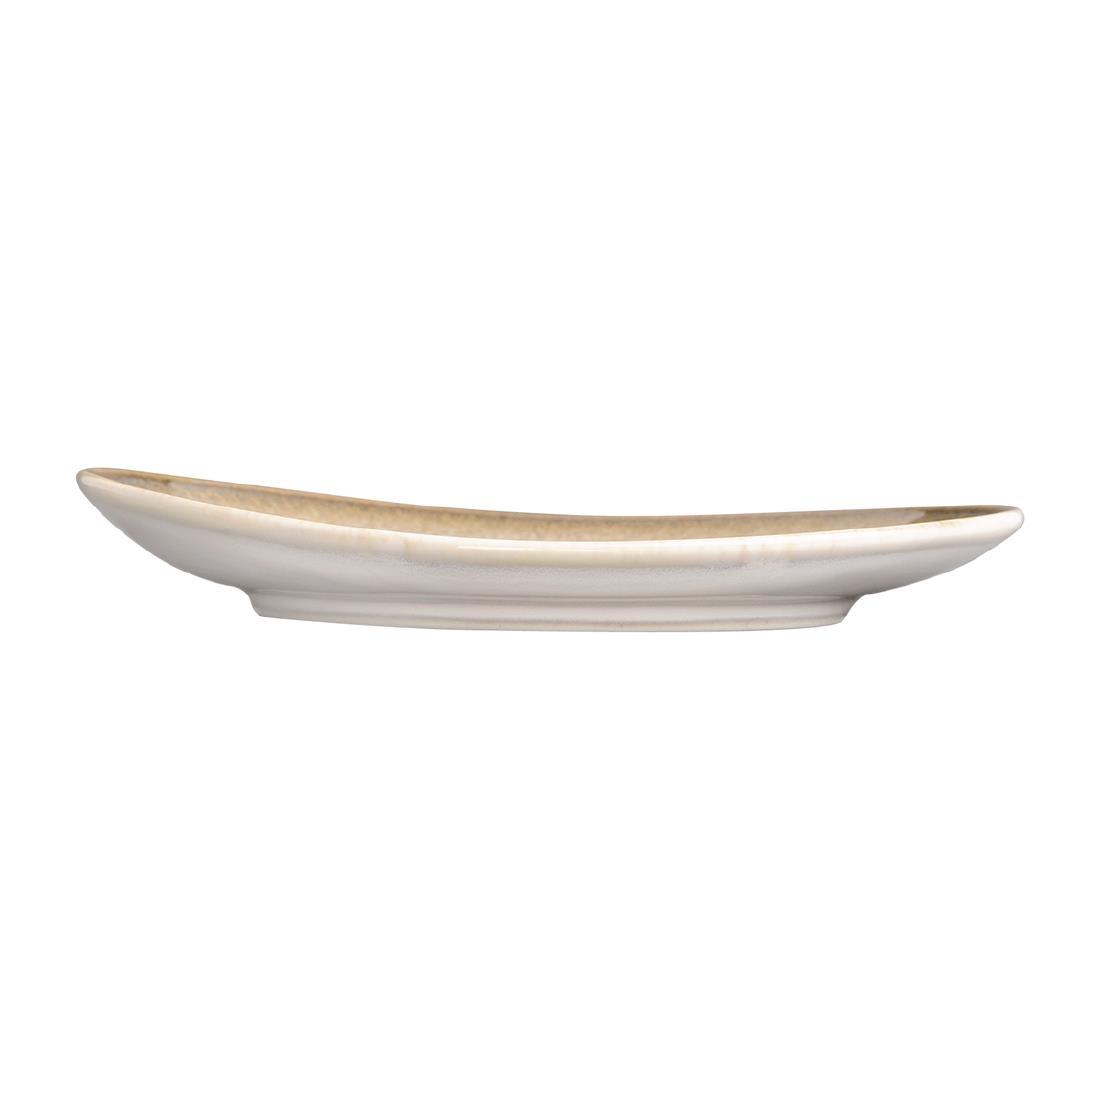 Olympia Birch Taupe Saucers 141 x 126mm (Pack of 6) - DR787  - 2